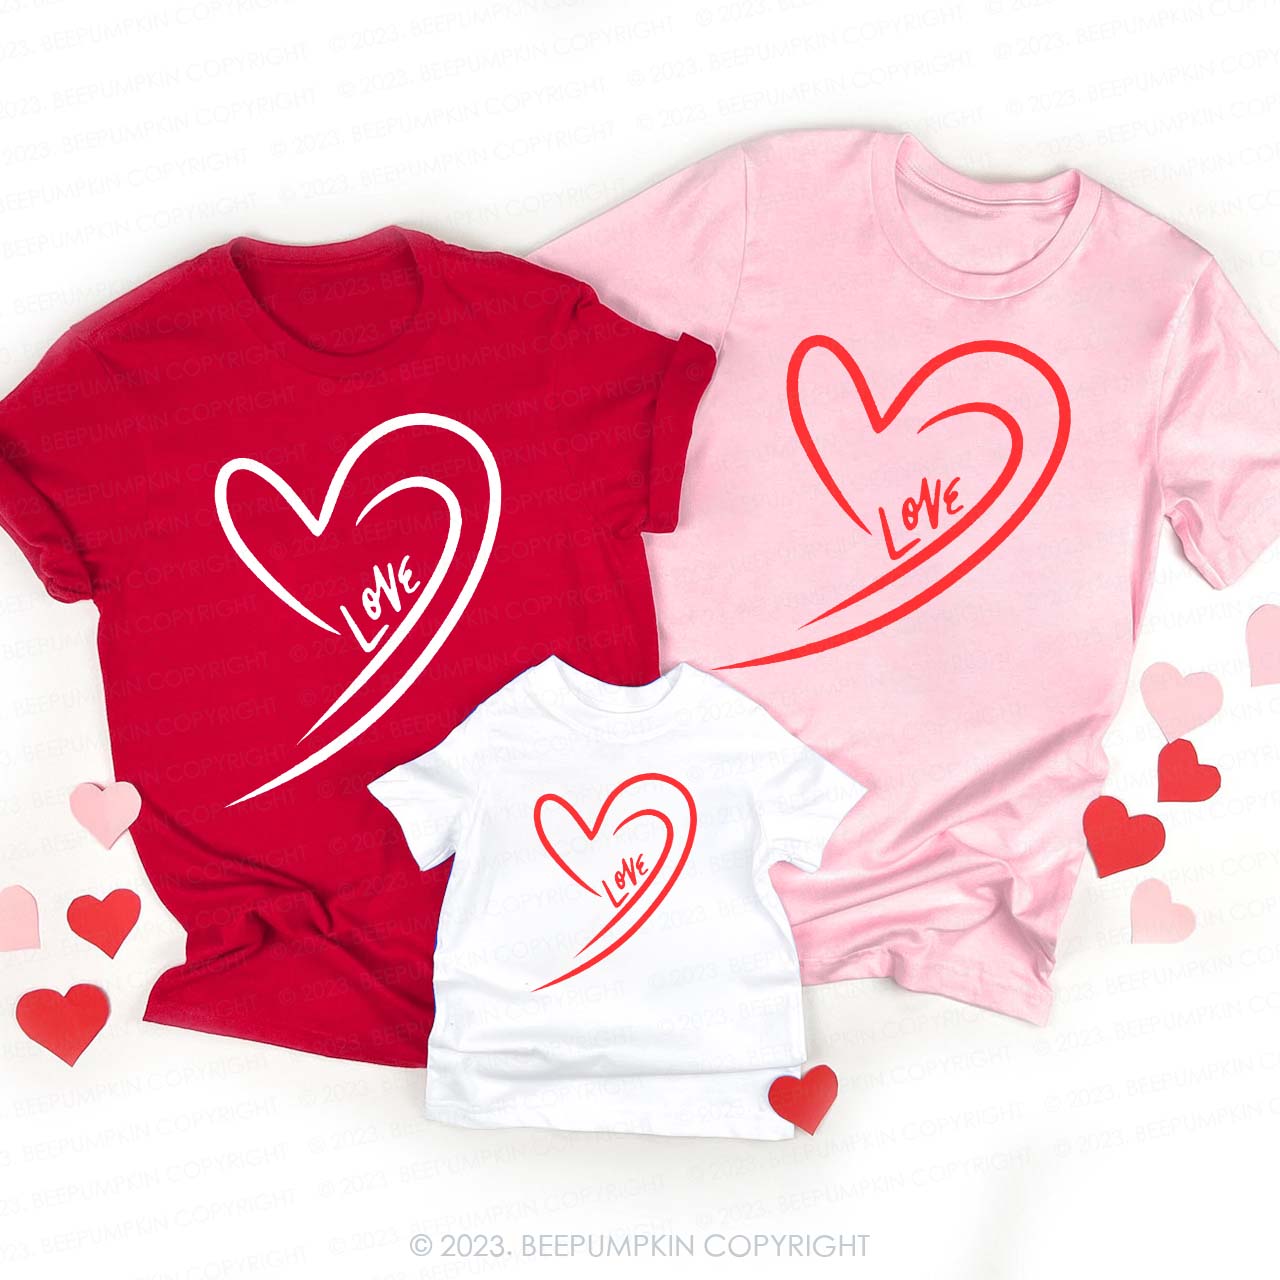 Cute Valentine's Family Matching Shirts - Love Heart